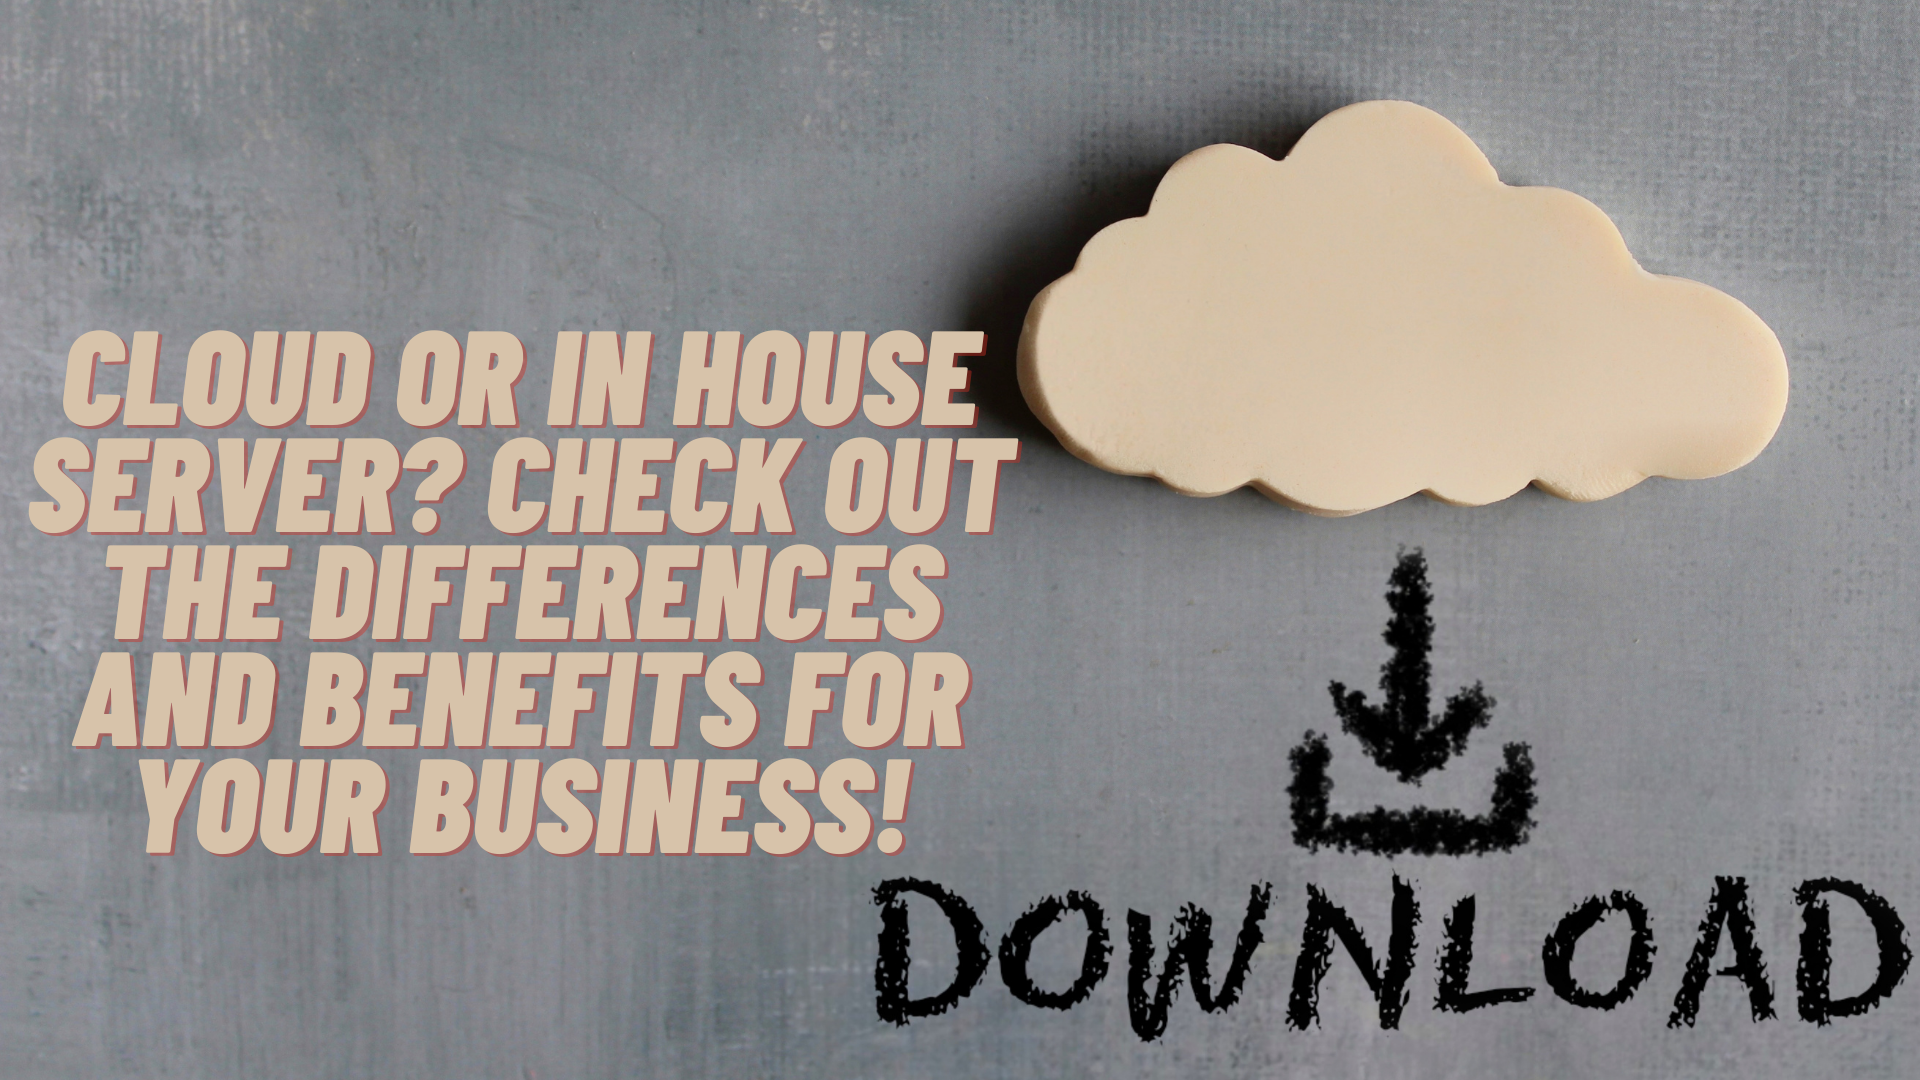 Image of Cloud or In House Server? Check Out the Differences and Benefits for Your Business!